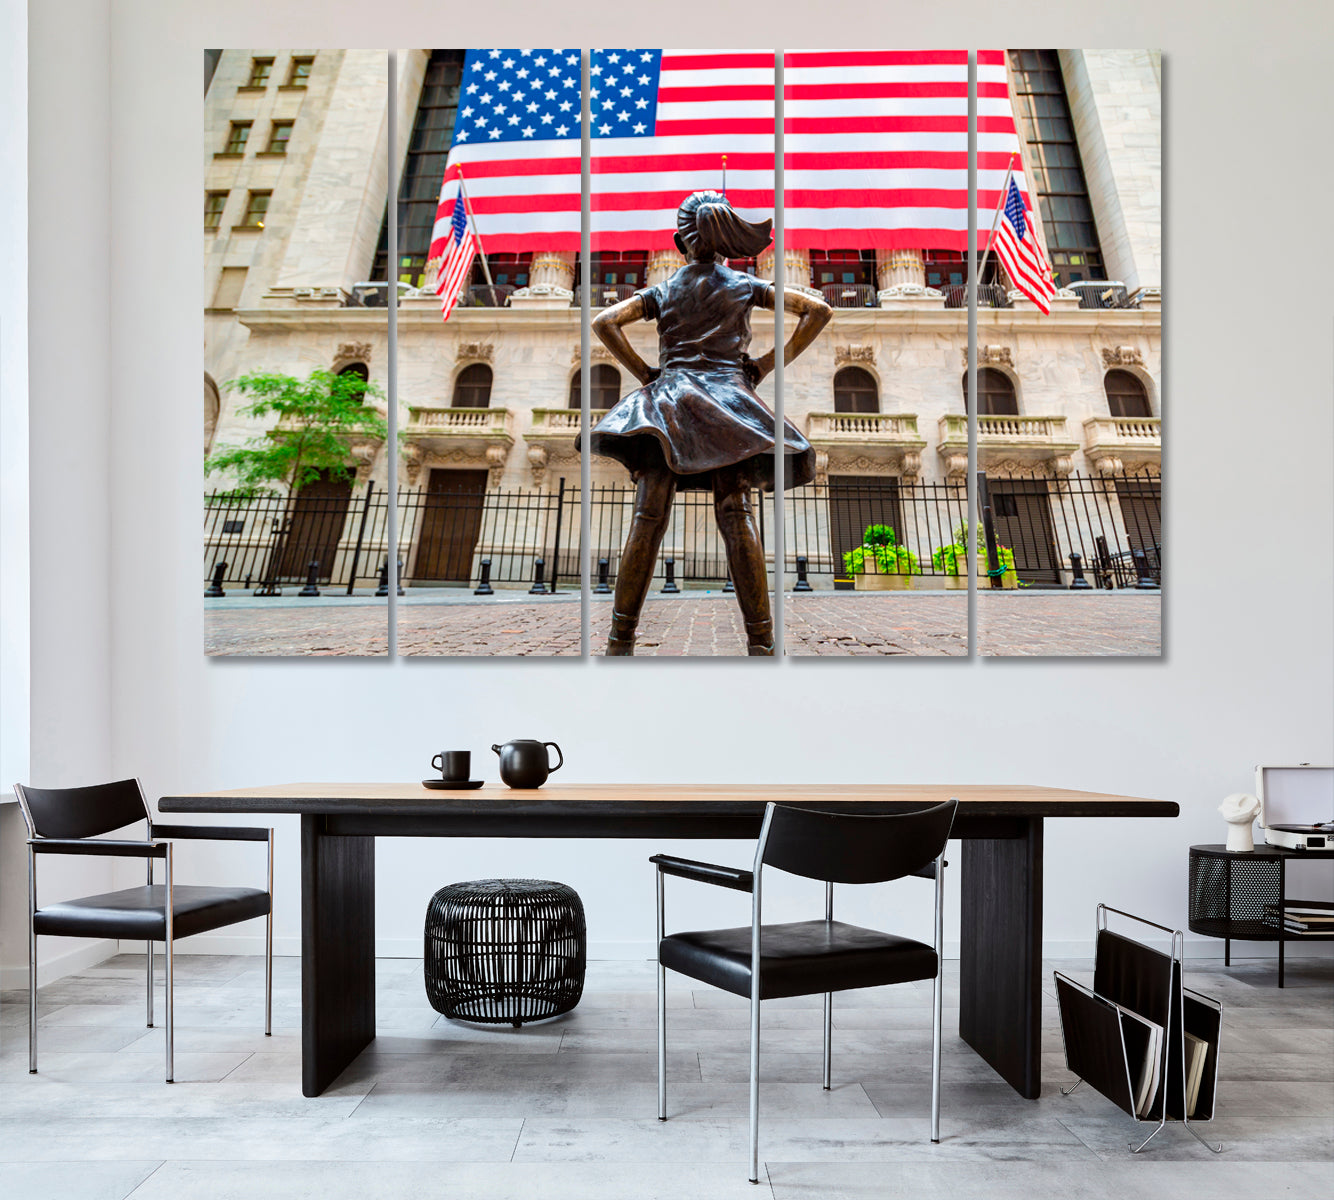 Fearless Girl American Flag New York Stock Exchange Building Cities Wall Art Artesty 5 panels 36" x 24" 